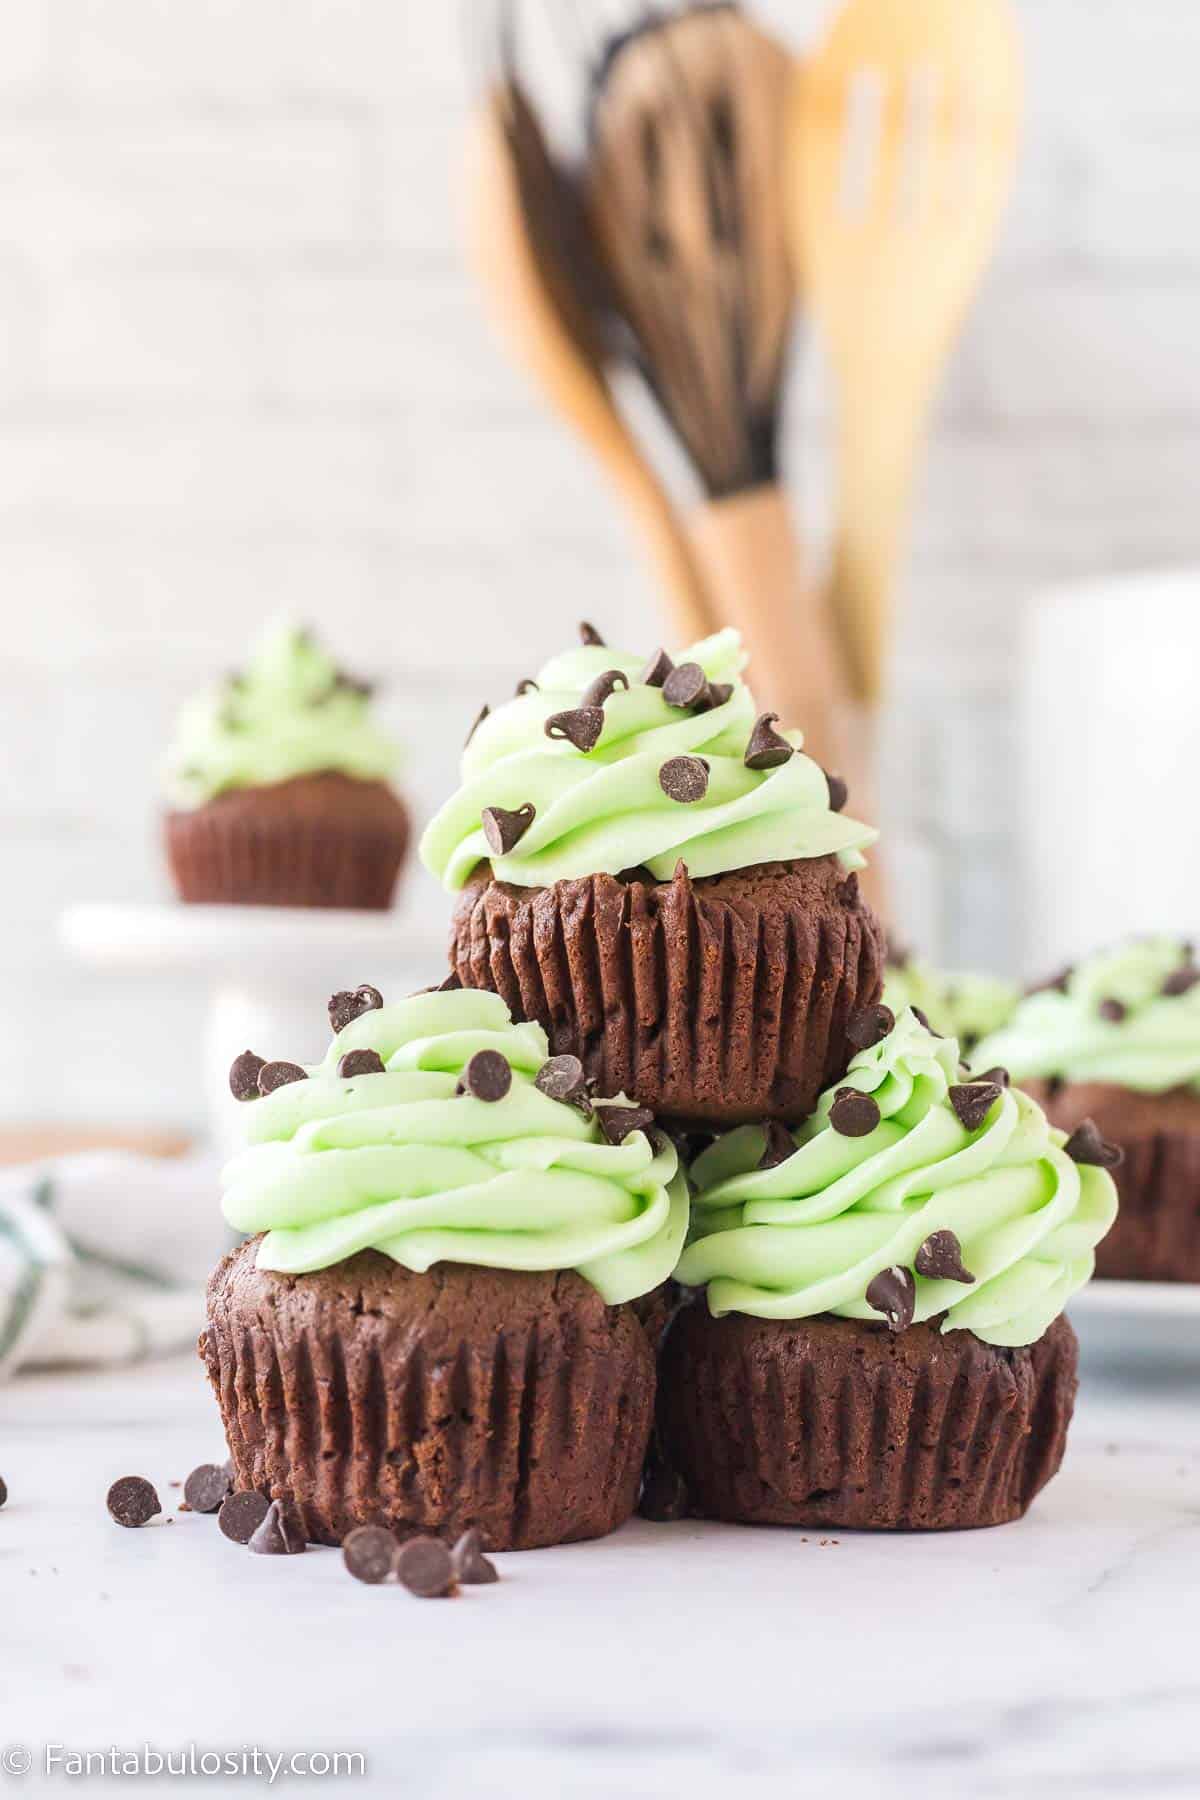 Mint chocolate cupcake with cream cheese frosting.